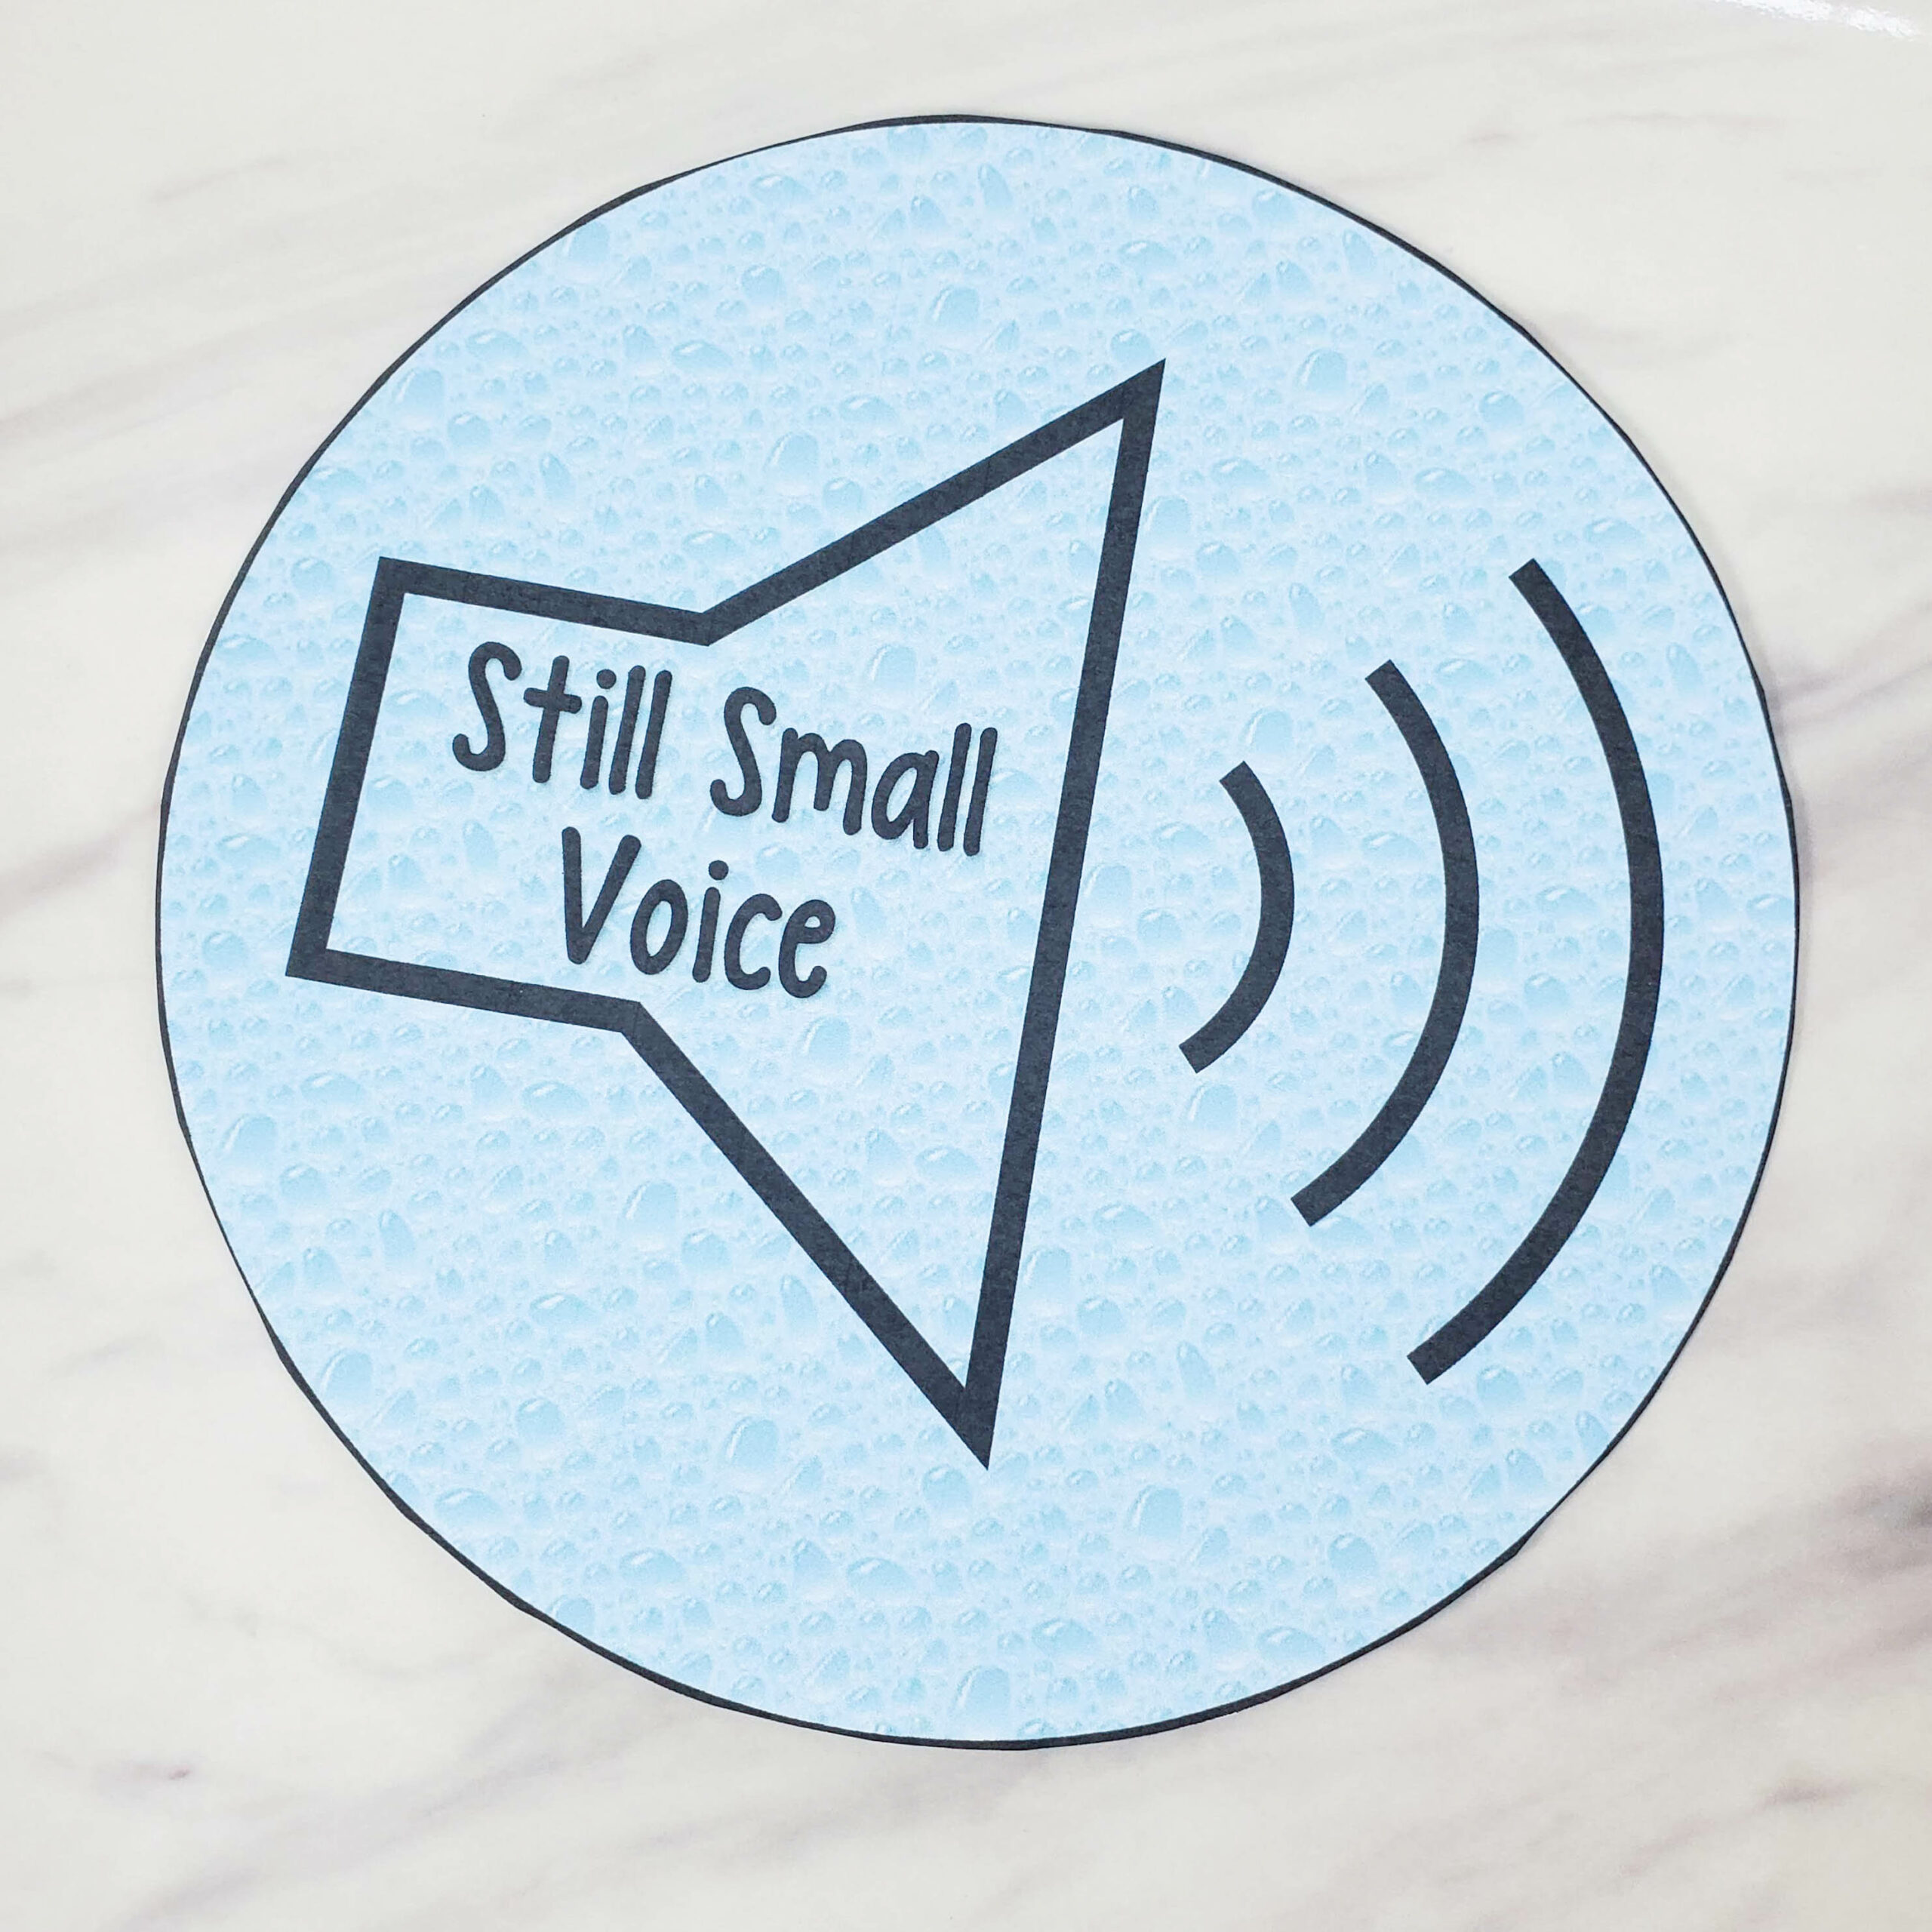 The Holy Ghost Still Small Voice singing time activity to pass an object and whisper sing the next word when the music stops! Fun and easy activity for LDS Primary Music Leaders.